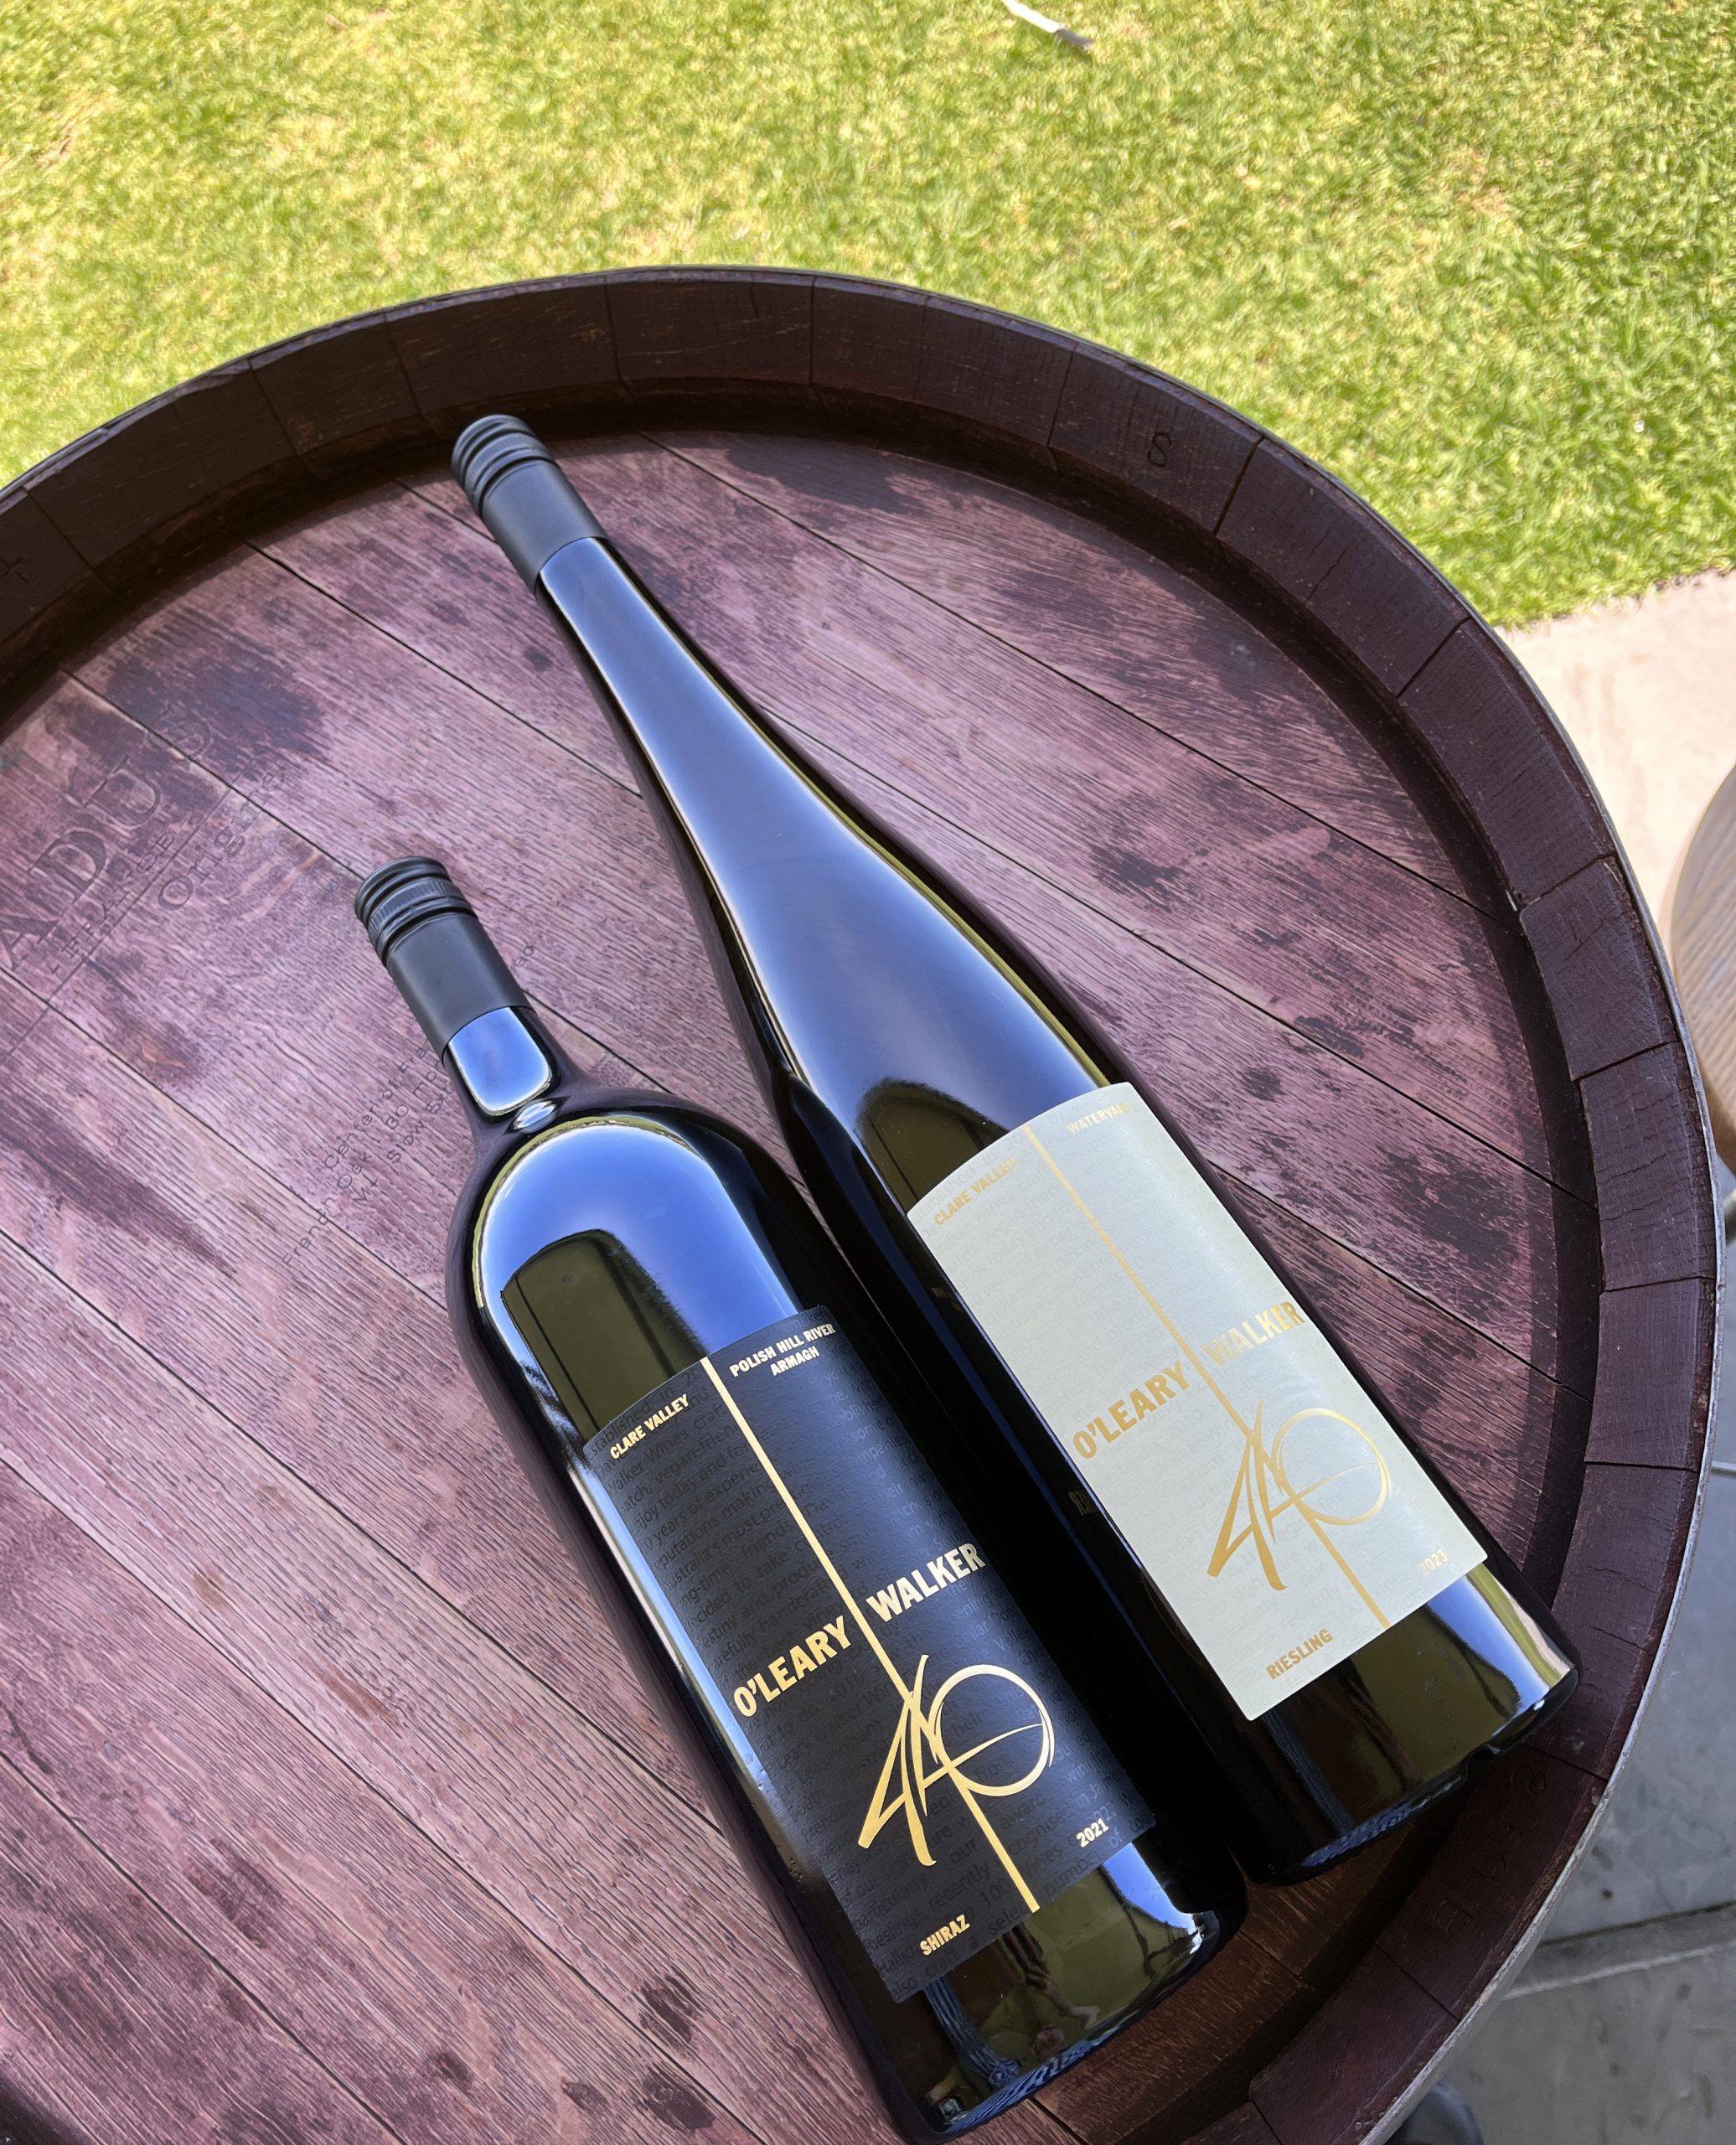 WIN 2 x magnums of O’Leary Walker Wines!